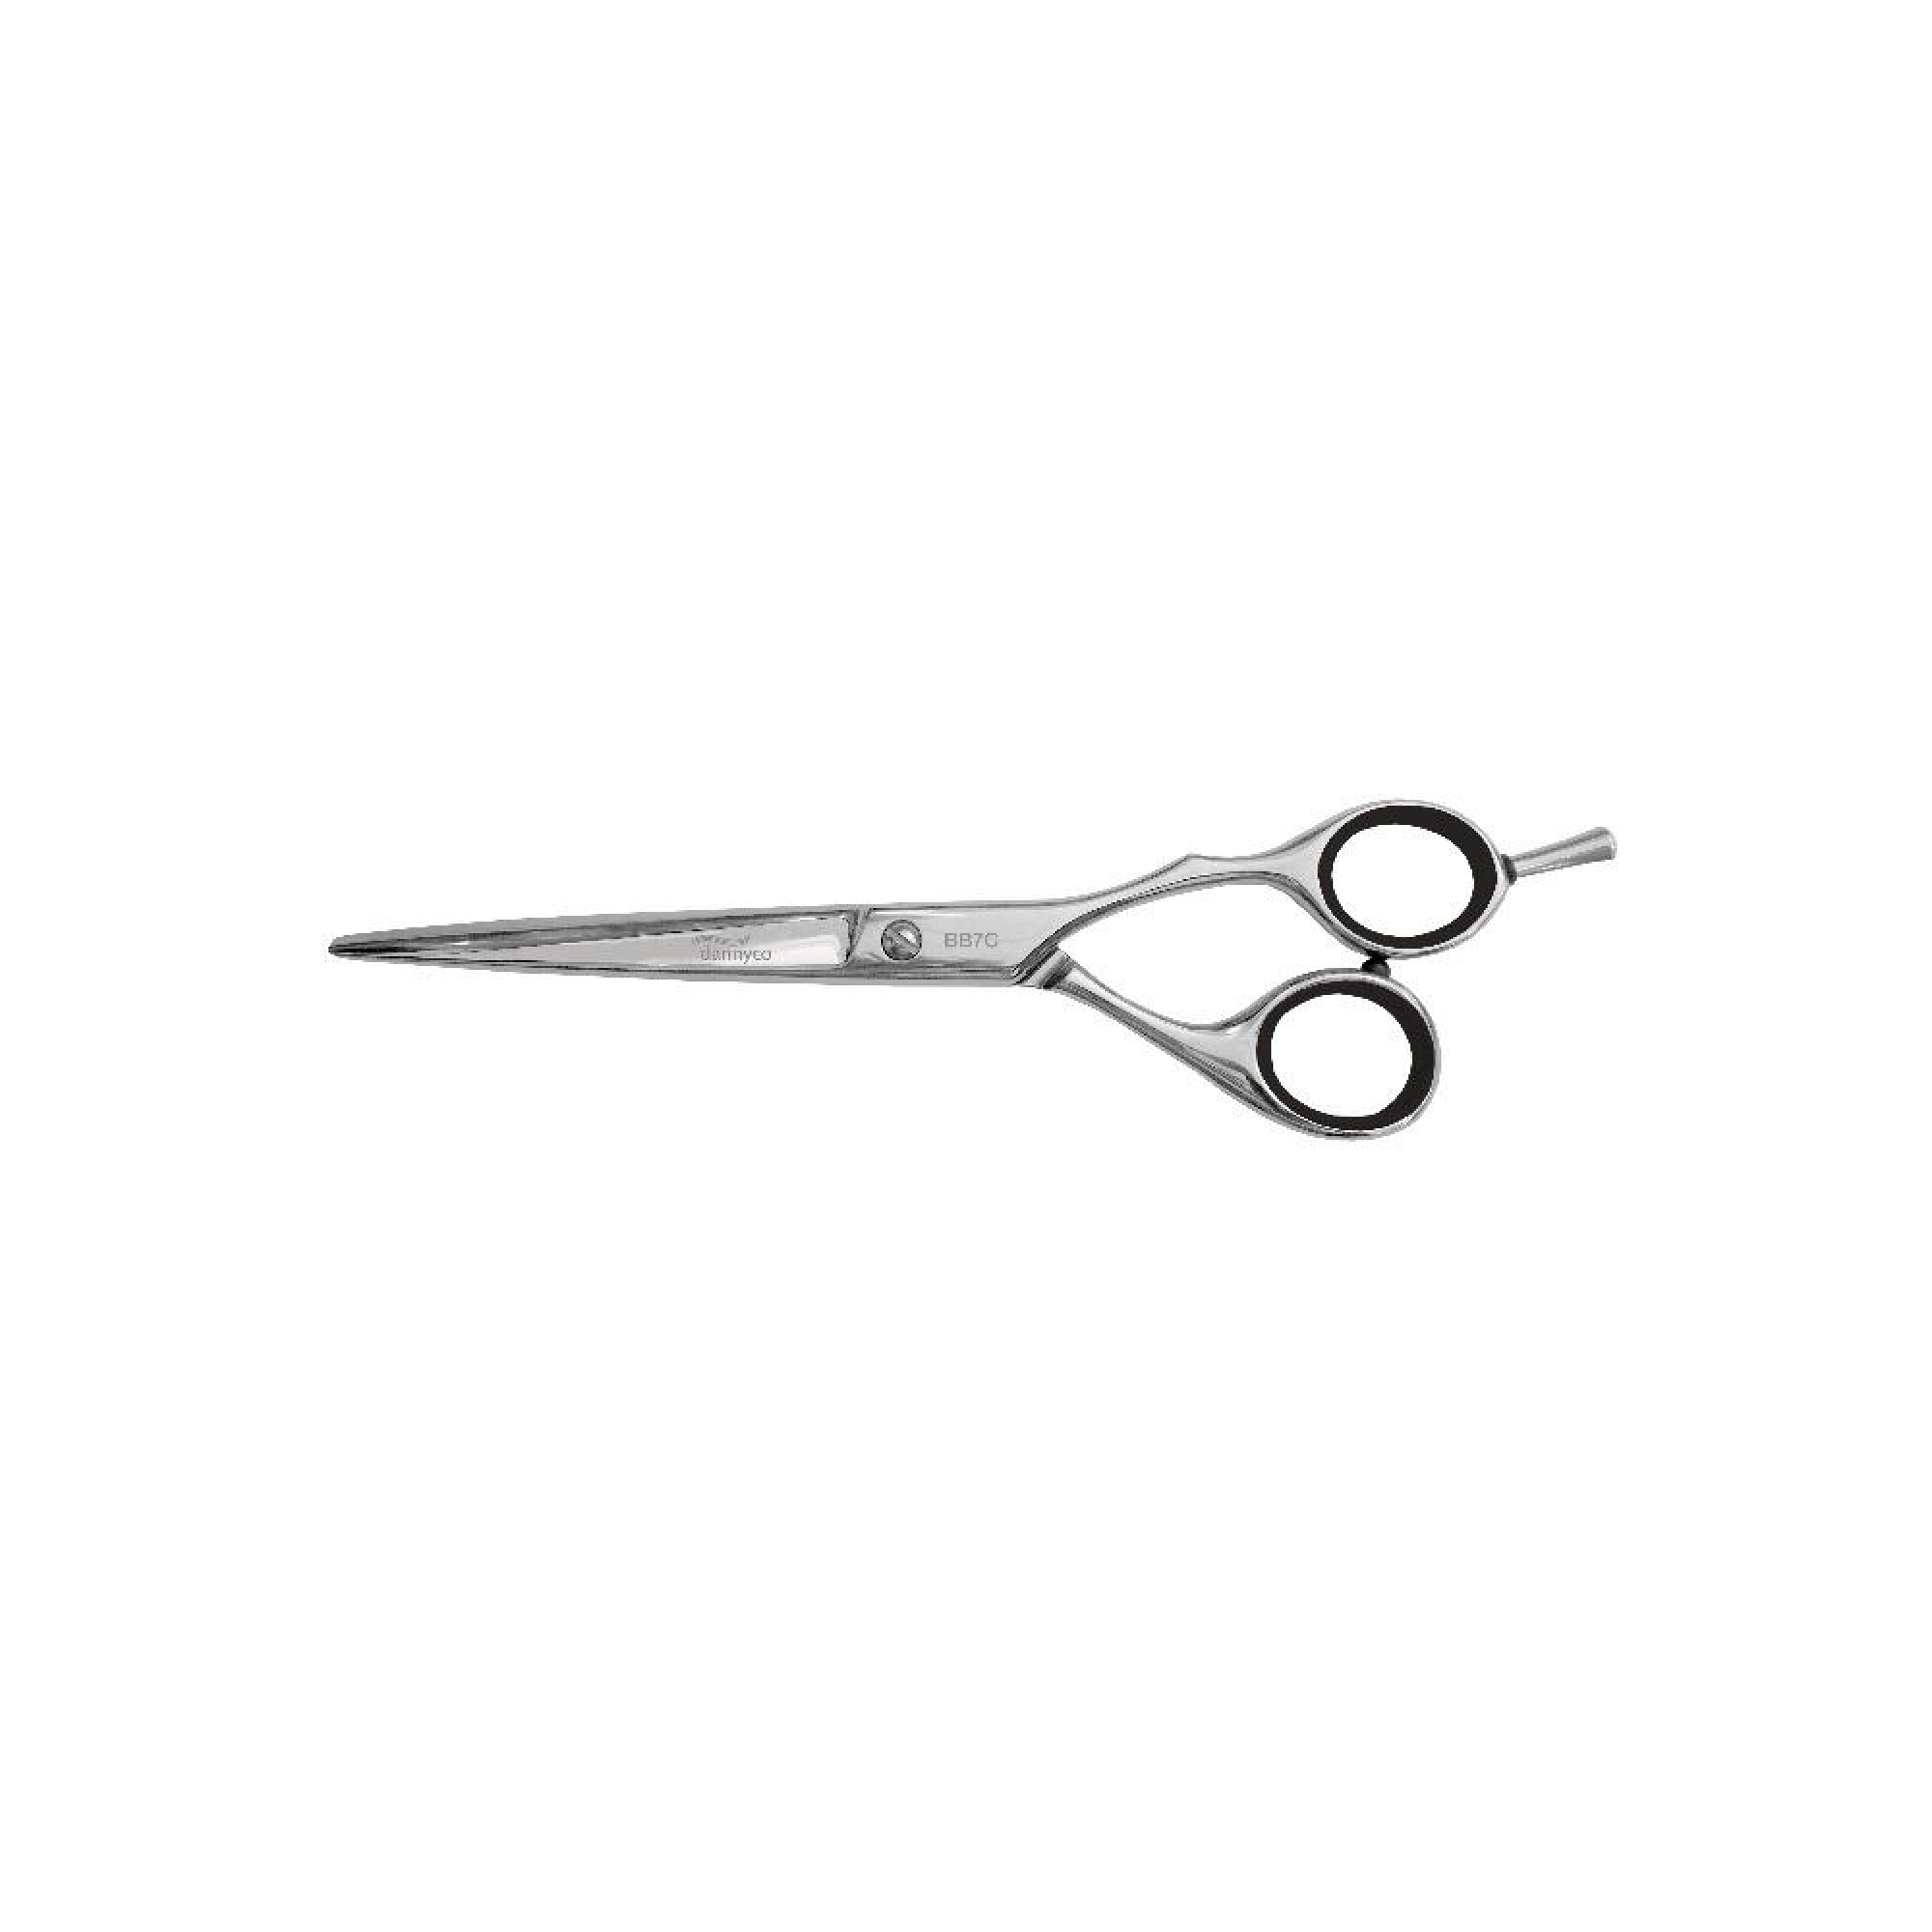 7" Stainless Steel Shears